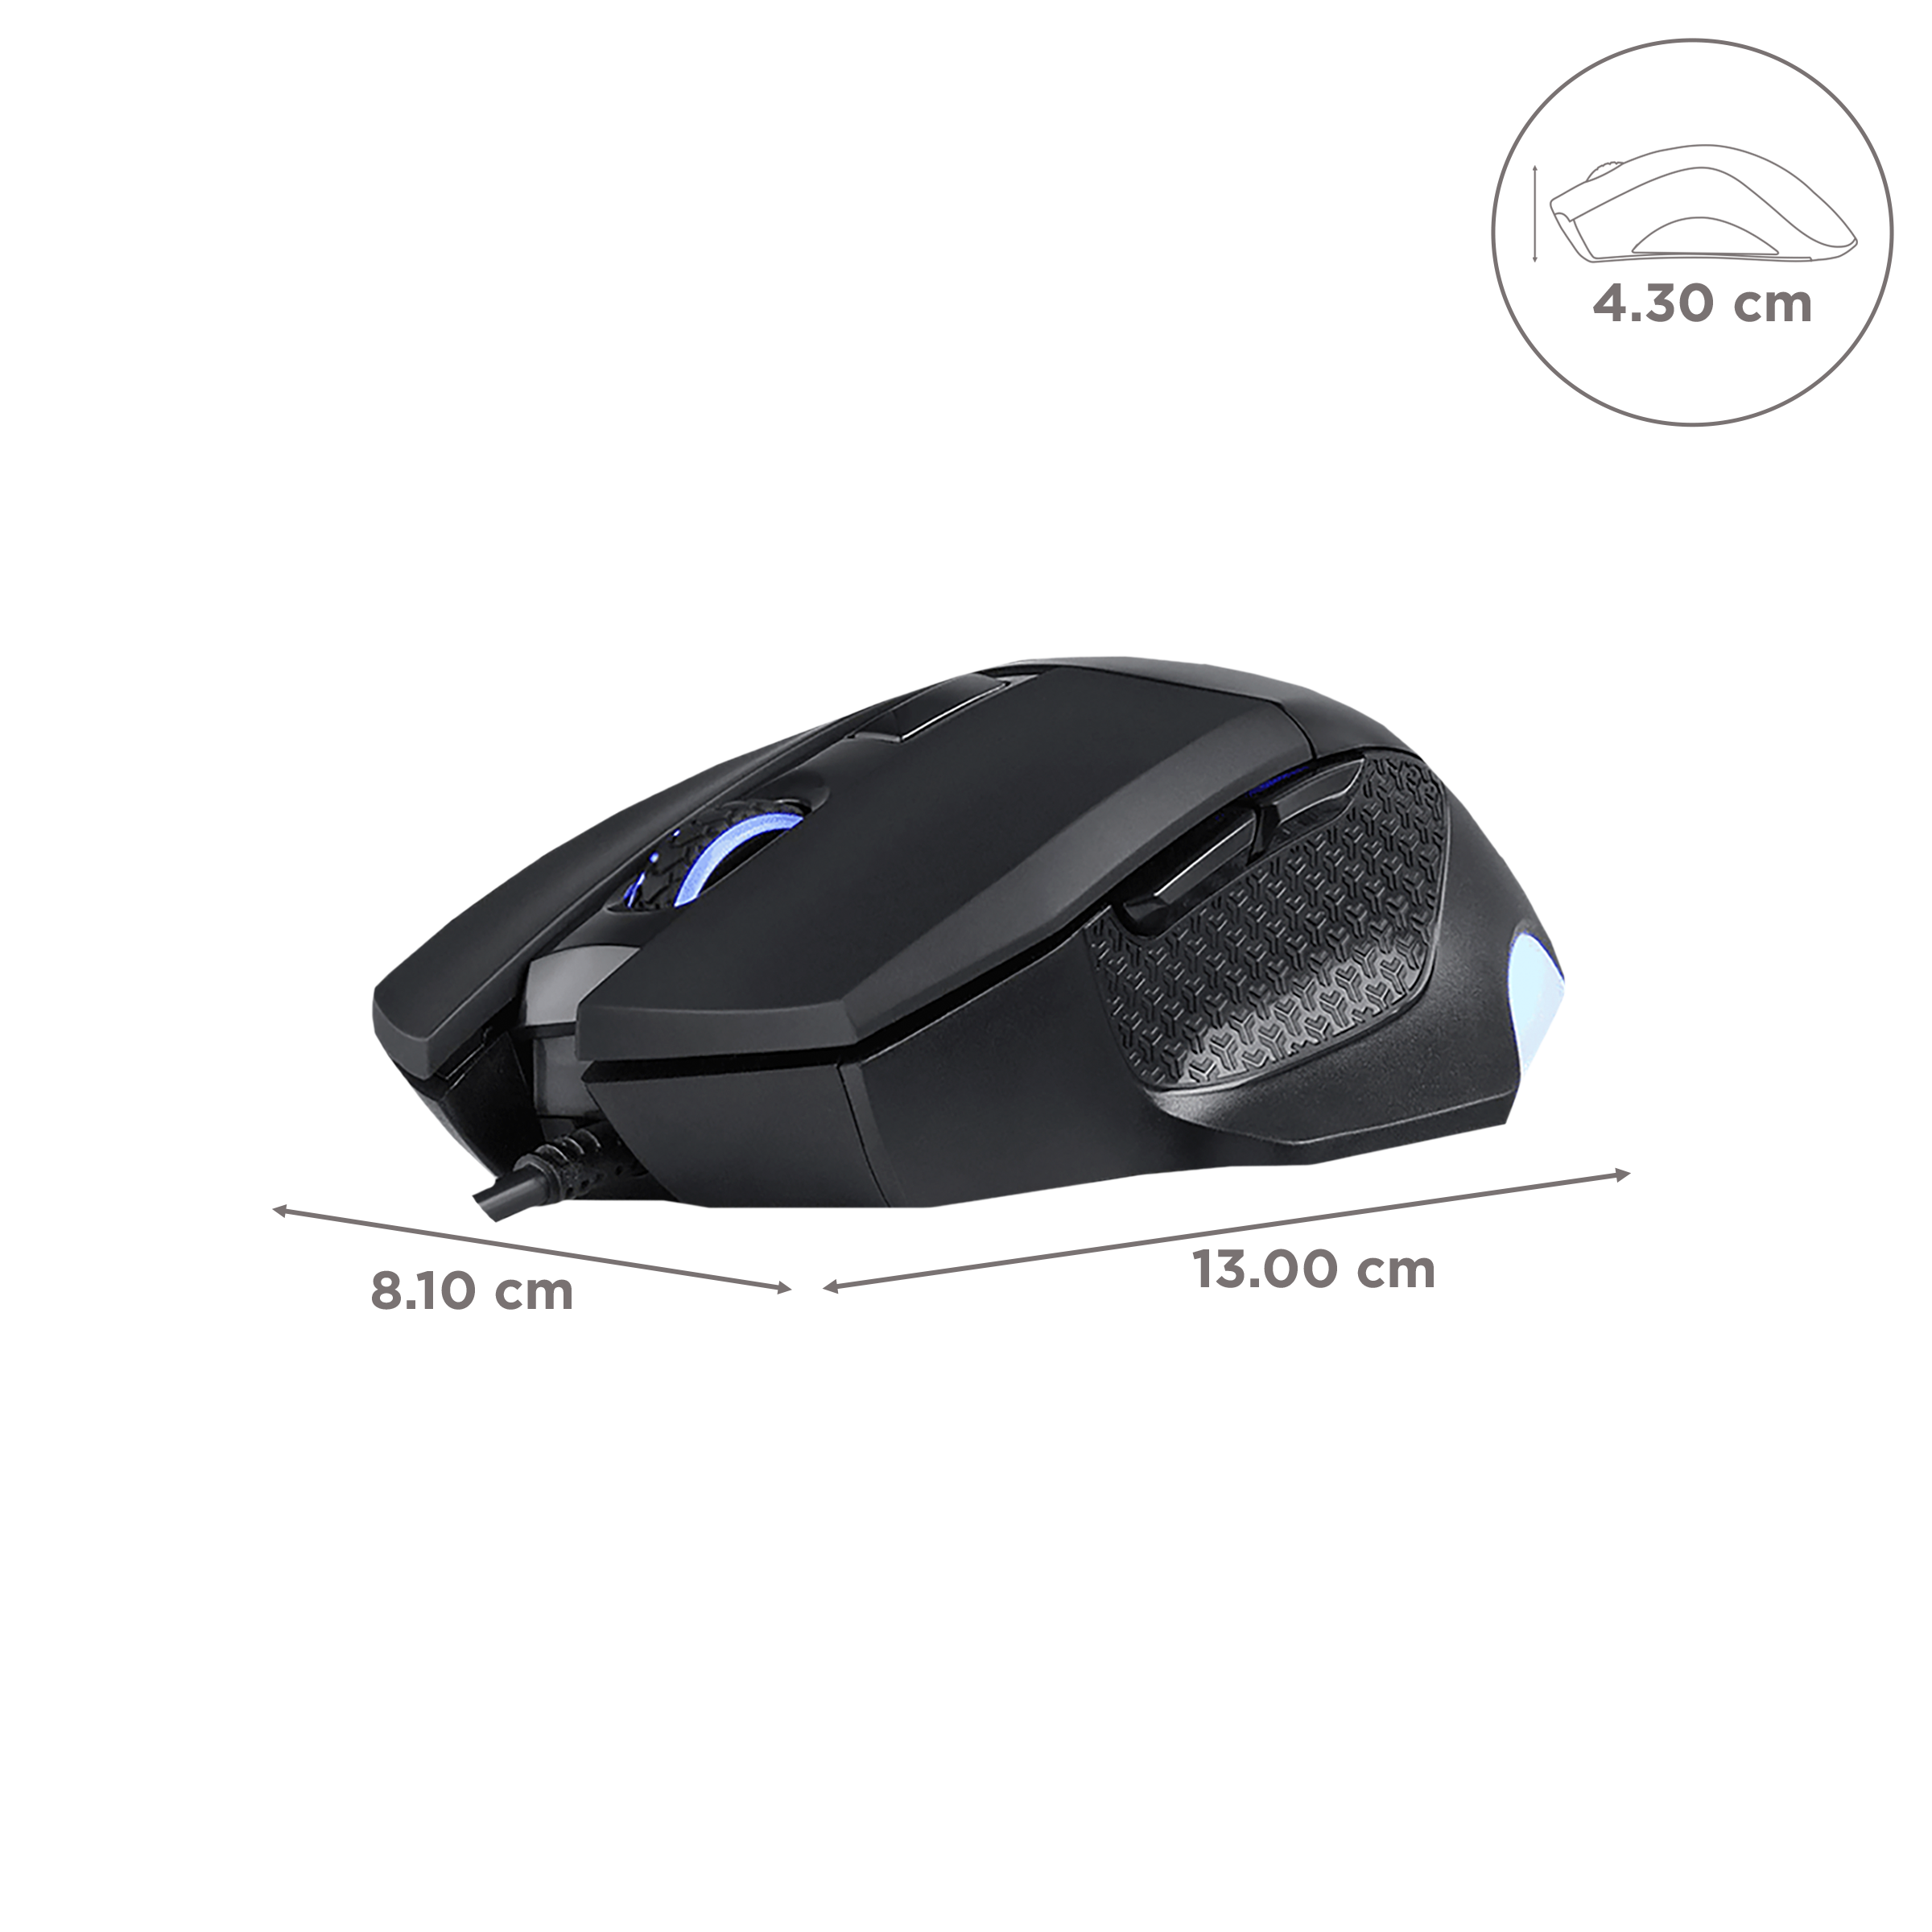 Buy HP G200 Wired Optical Gaming Mouse with Customizable Buttons (4000 ...